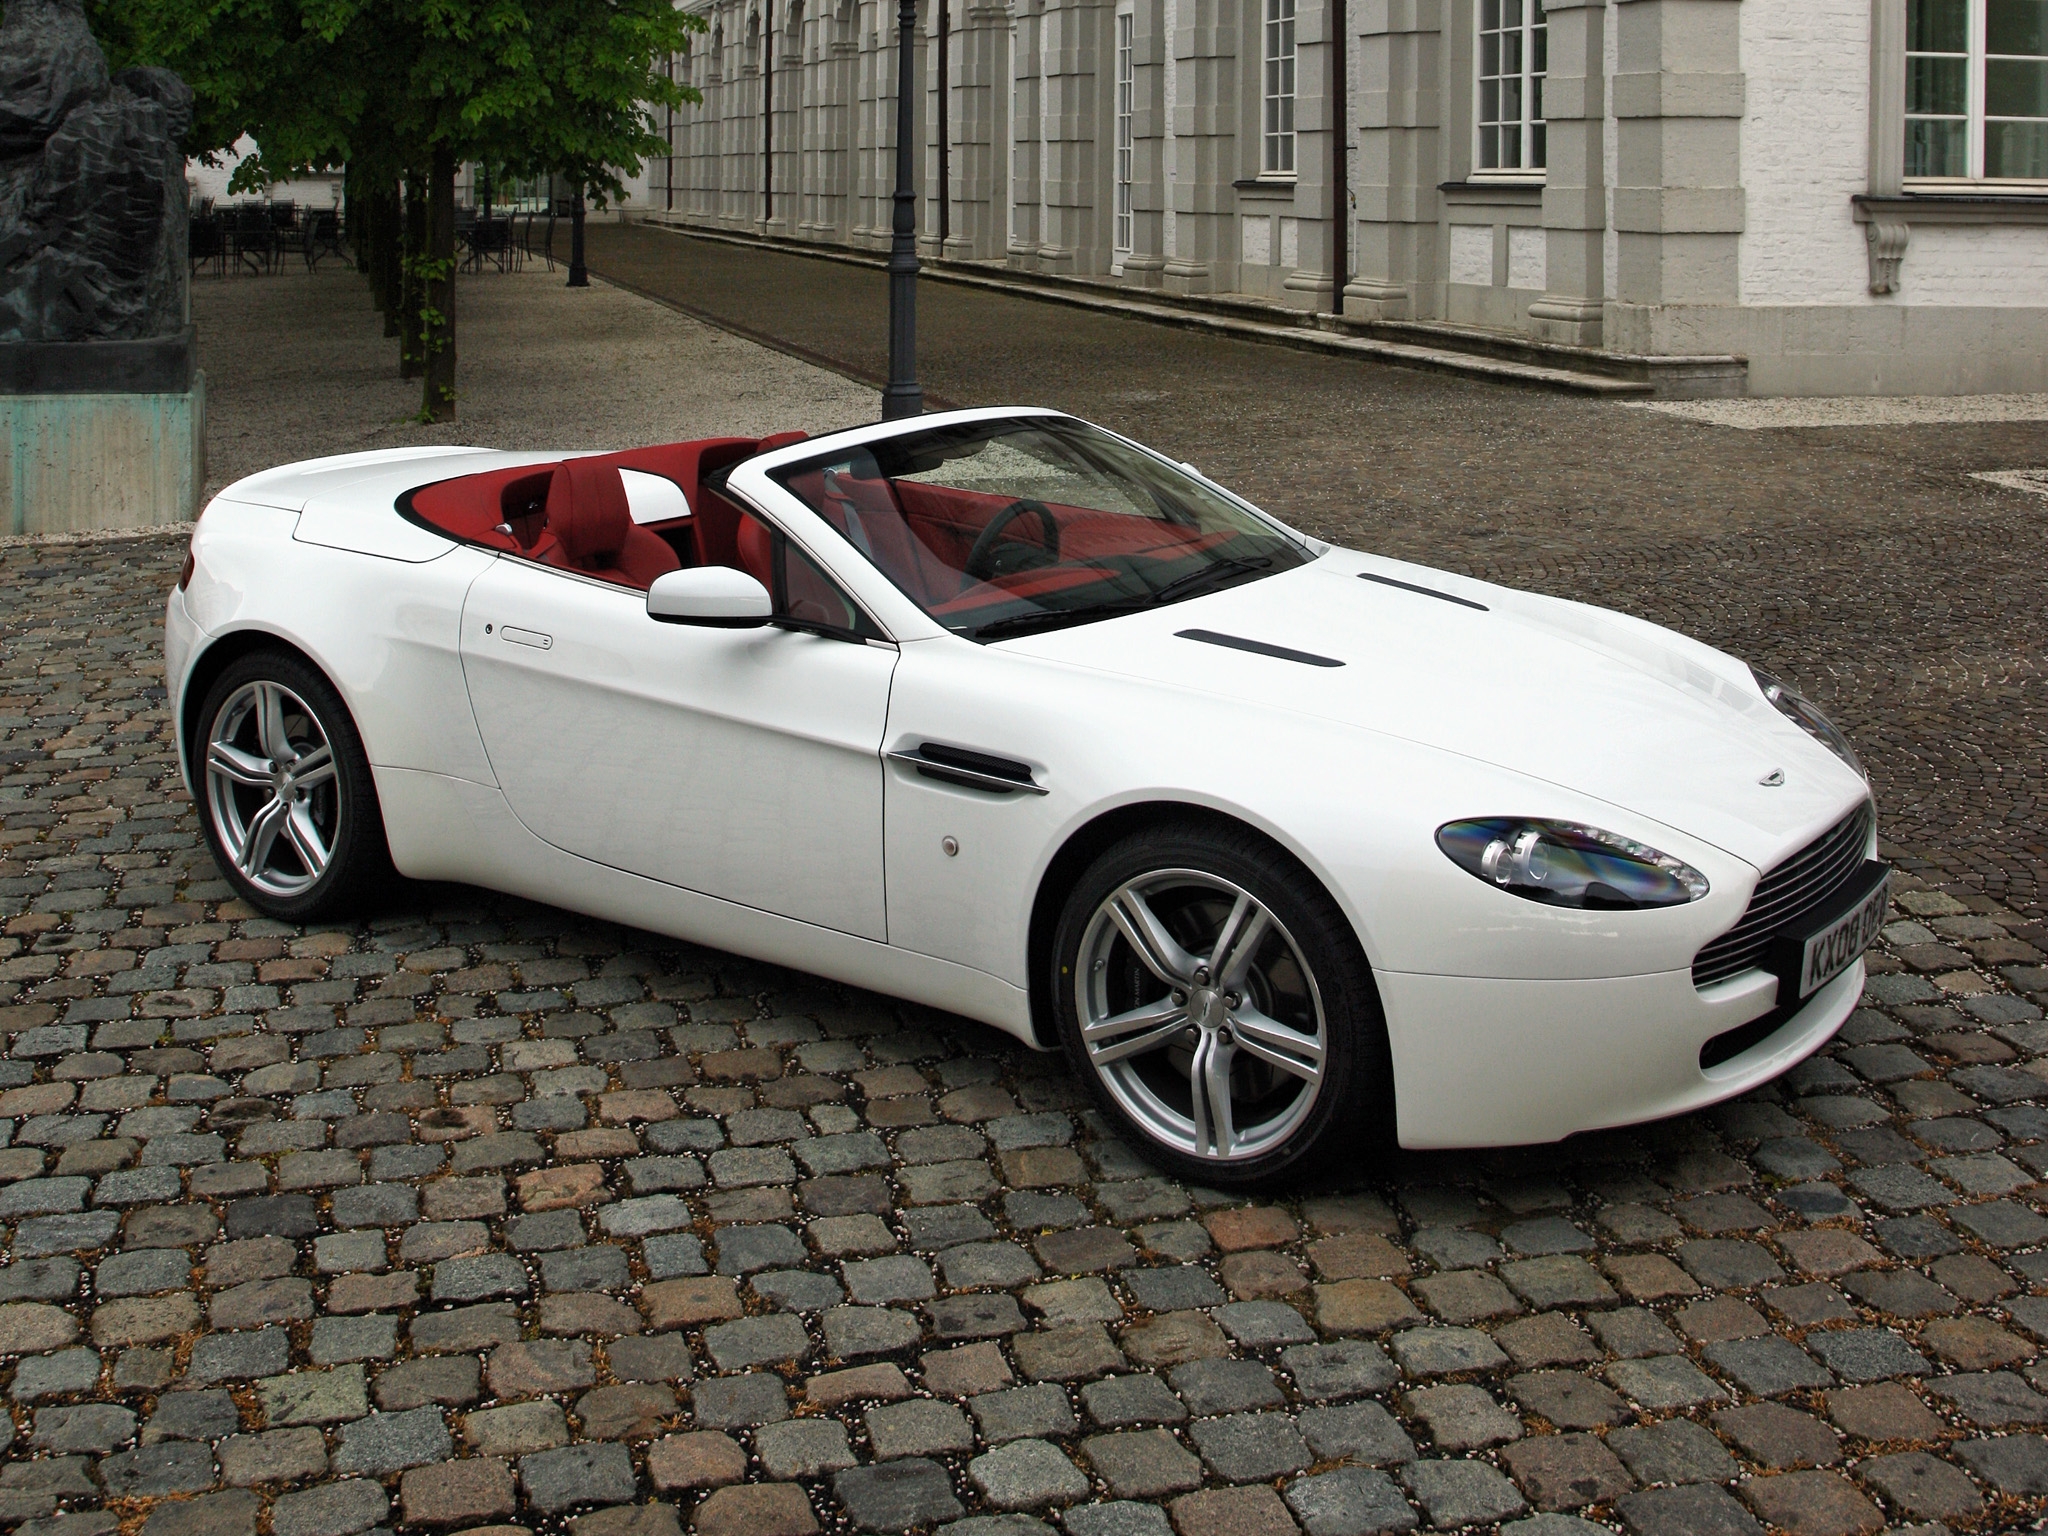 v8, aston martin, cars, white, side view, style, cabriolet, 2008, street, vantage cellphone